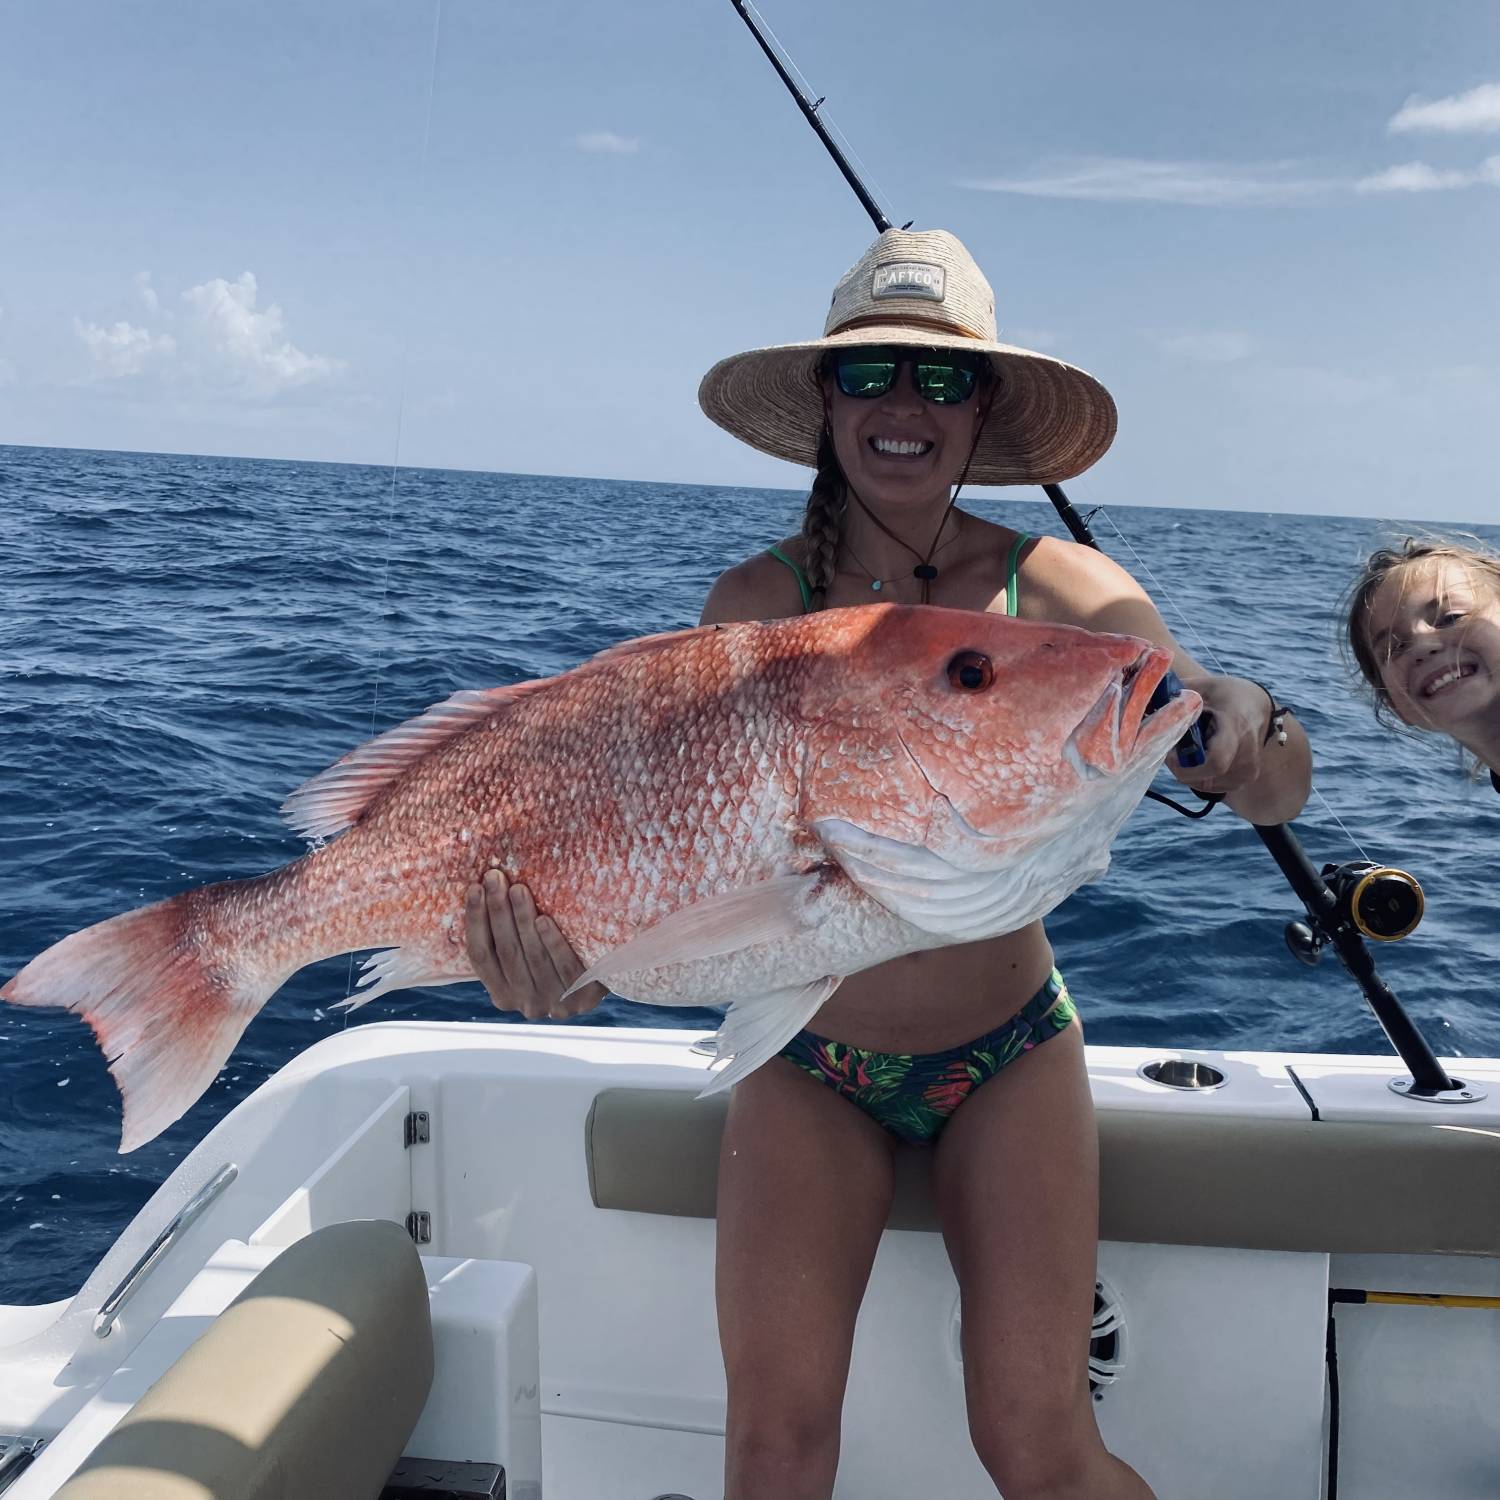 Biggest snapper we’ve ever caught. Great day on the water!